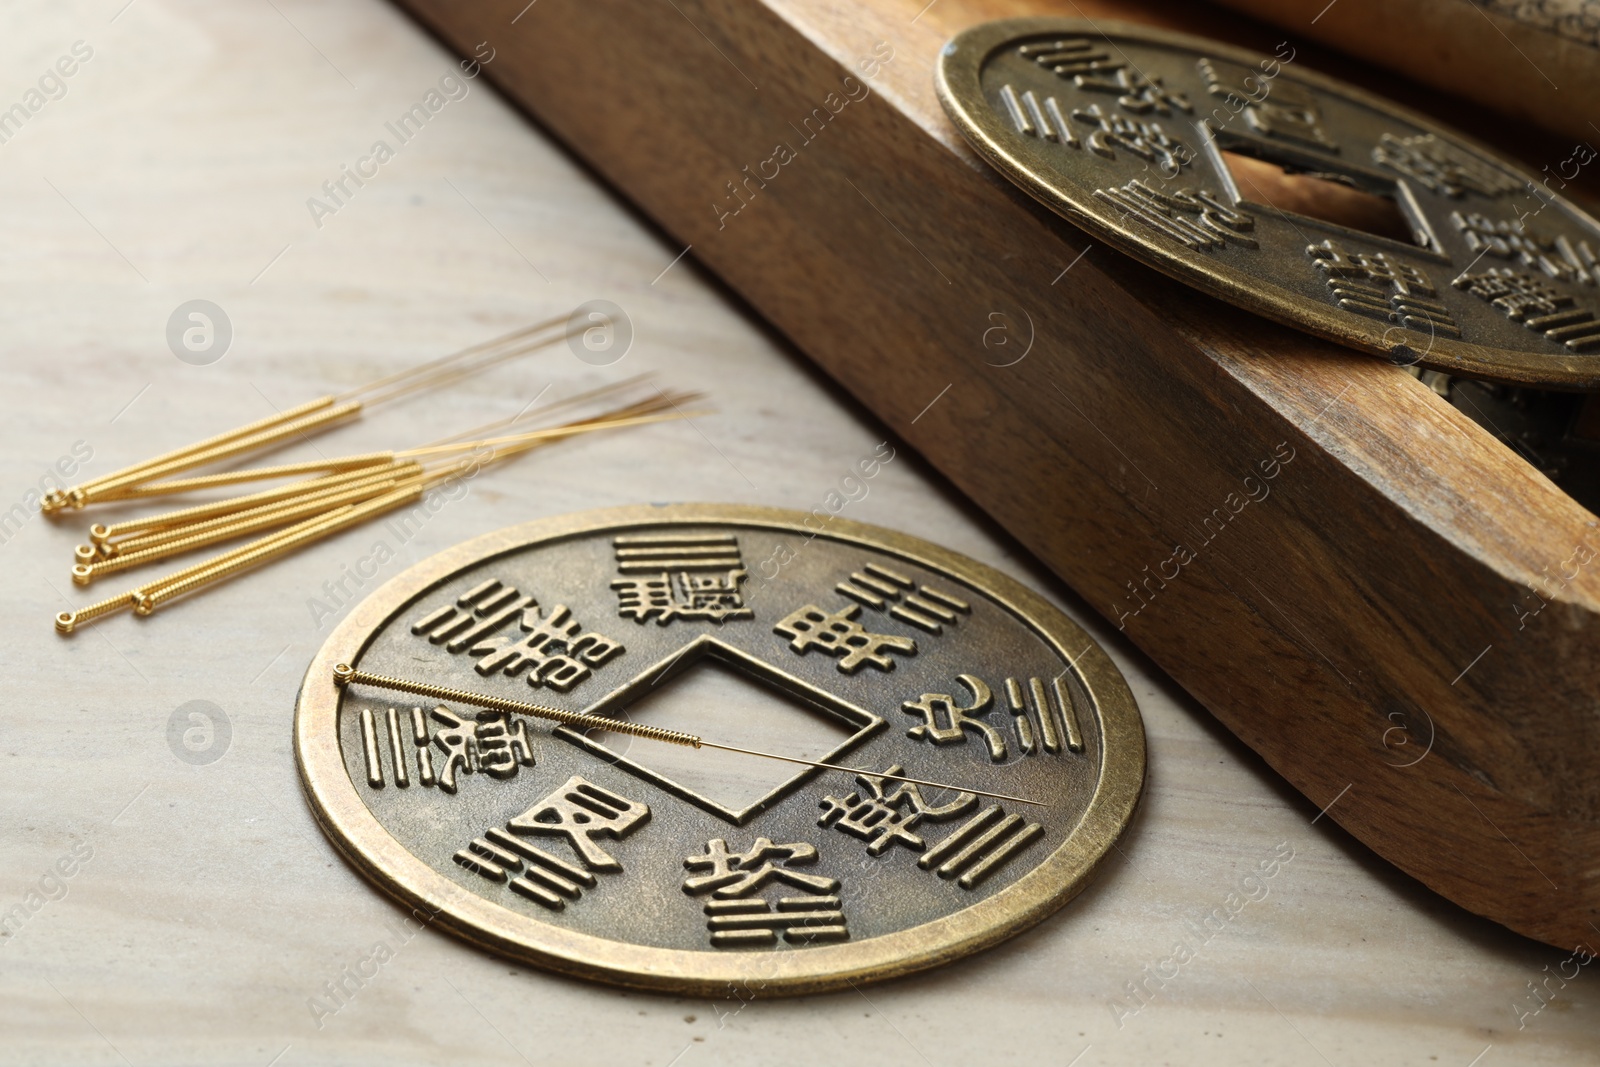 Photo of Acupuncture needles and Chinese coins on beige marble table, closeup